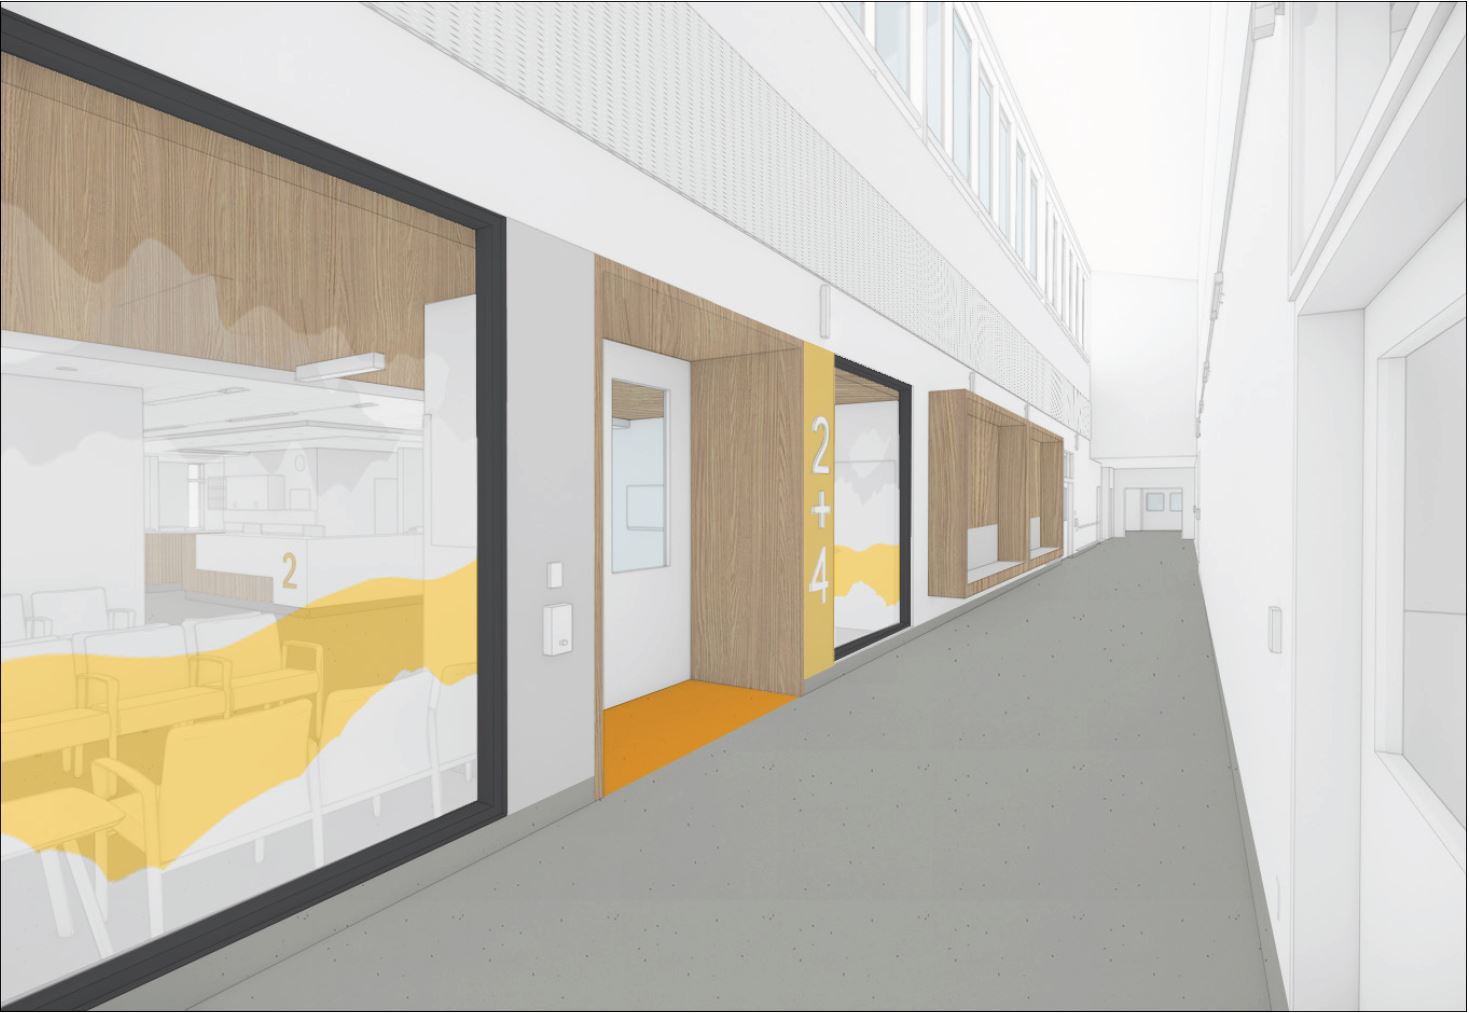 Concept rendering of the entrance to Zones Two and Four in the new emergency department. Designs may be subject to change.